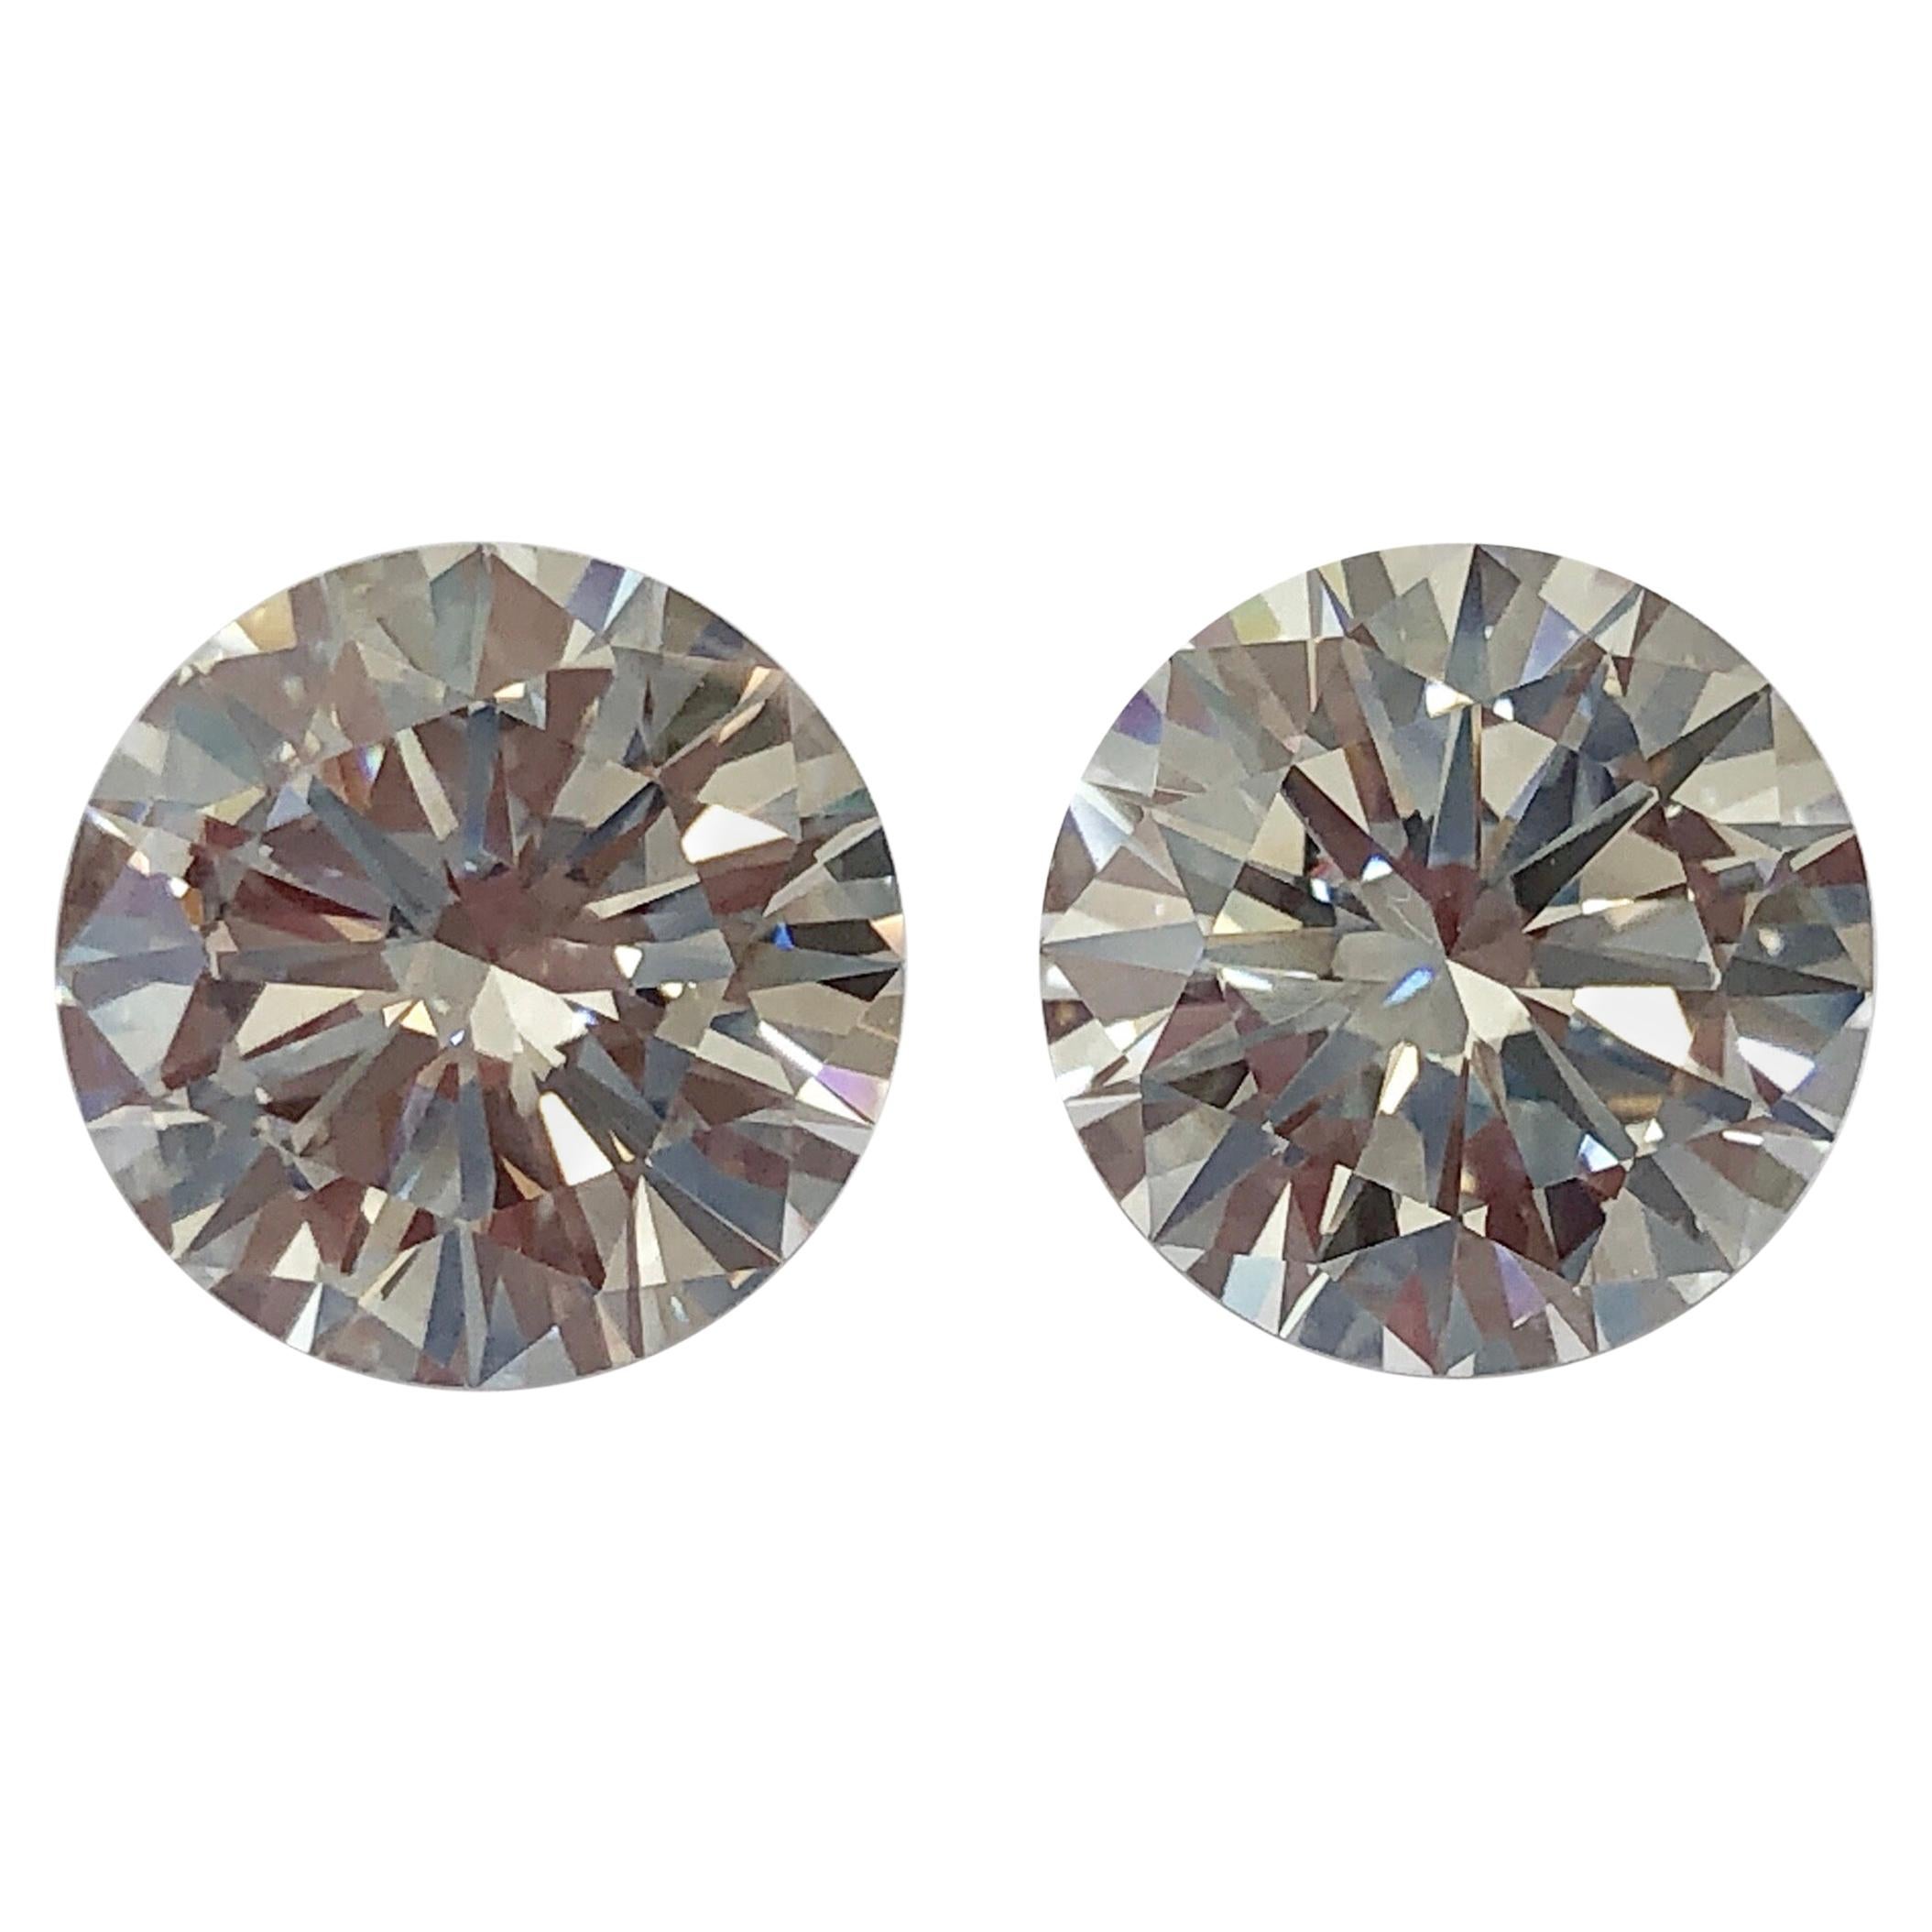 Matched Pair D-Color Internally Flawless Diamonds 8.13 Carat Total For Sale